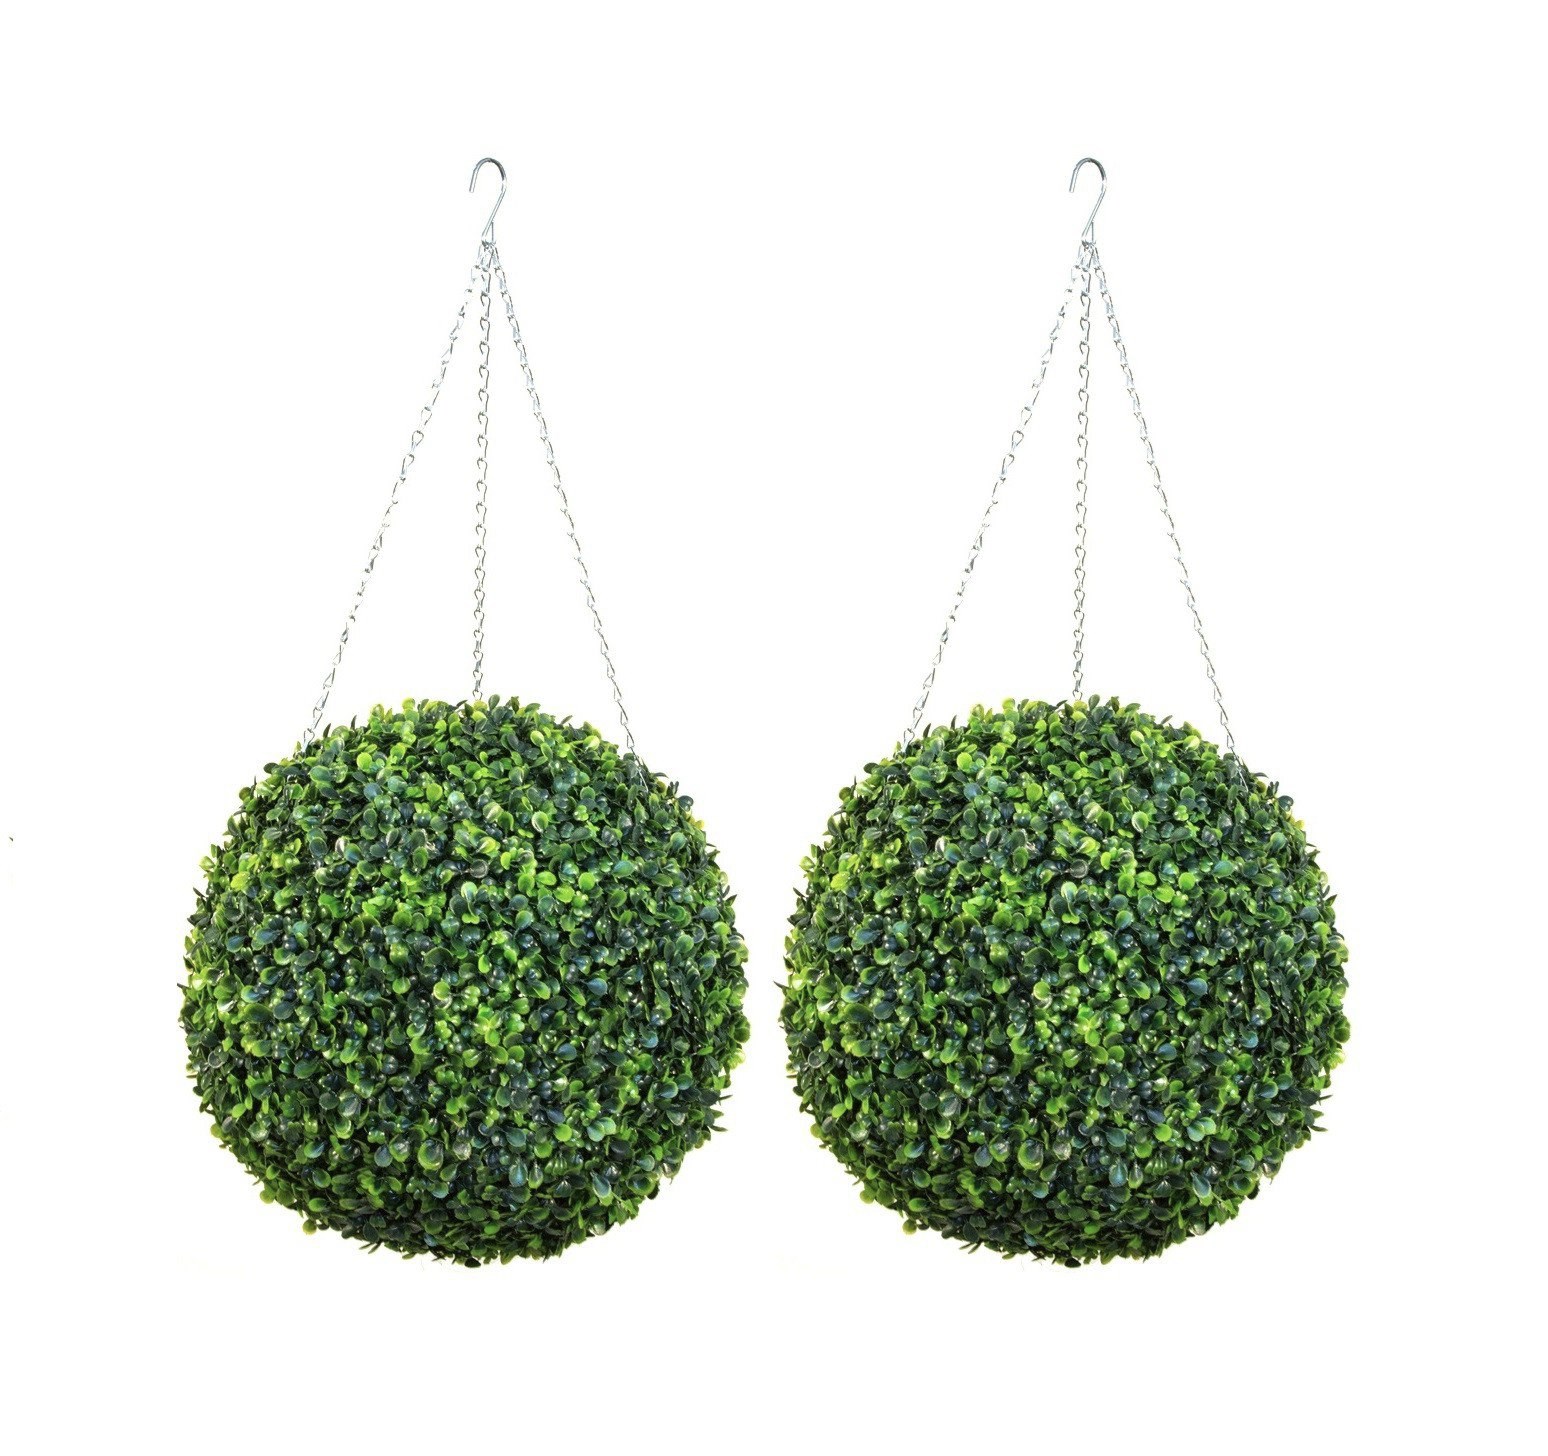 28cm Artificial Topiary Boxwood Balls by Primrose™